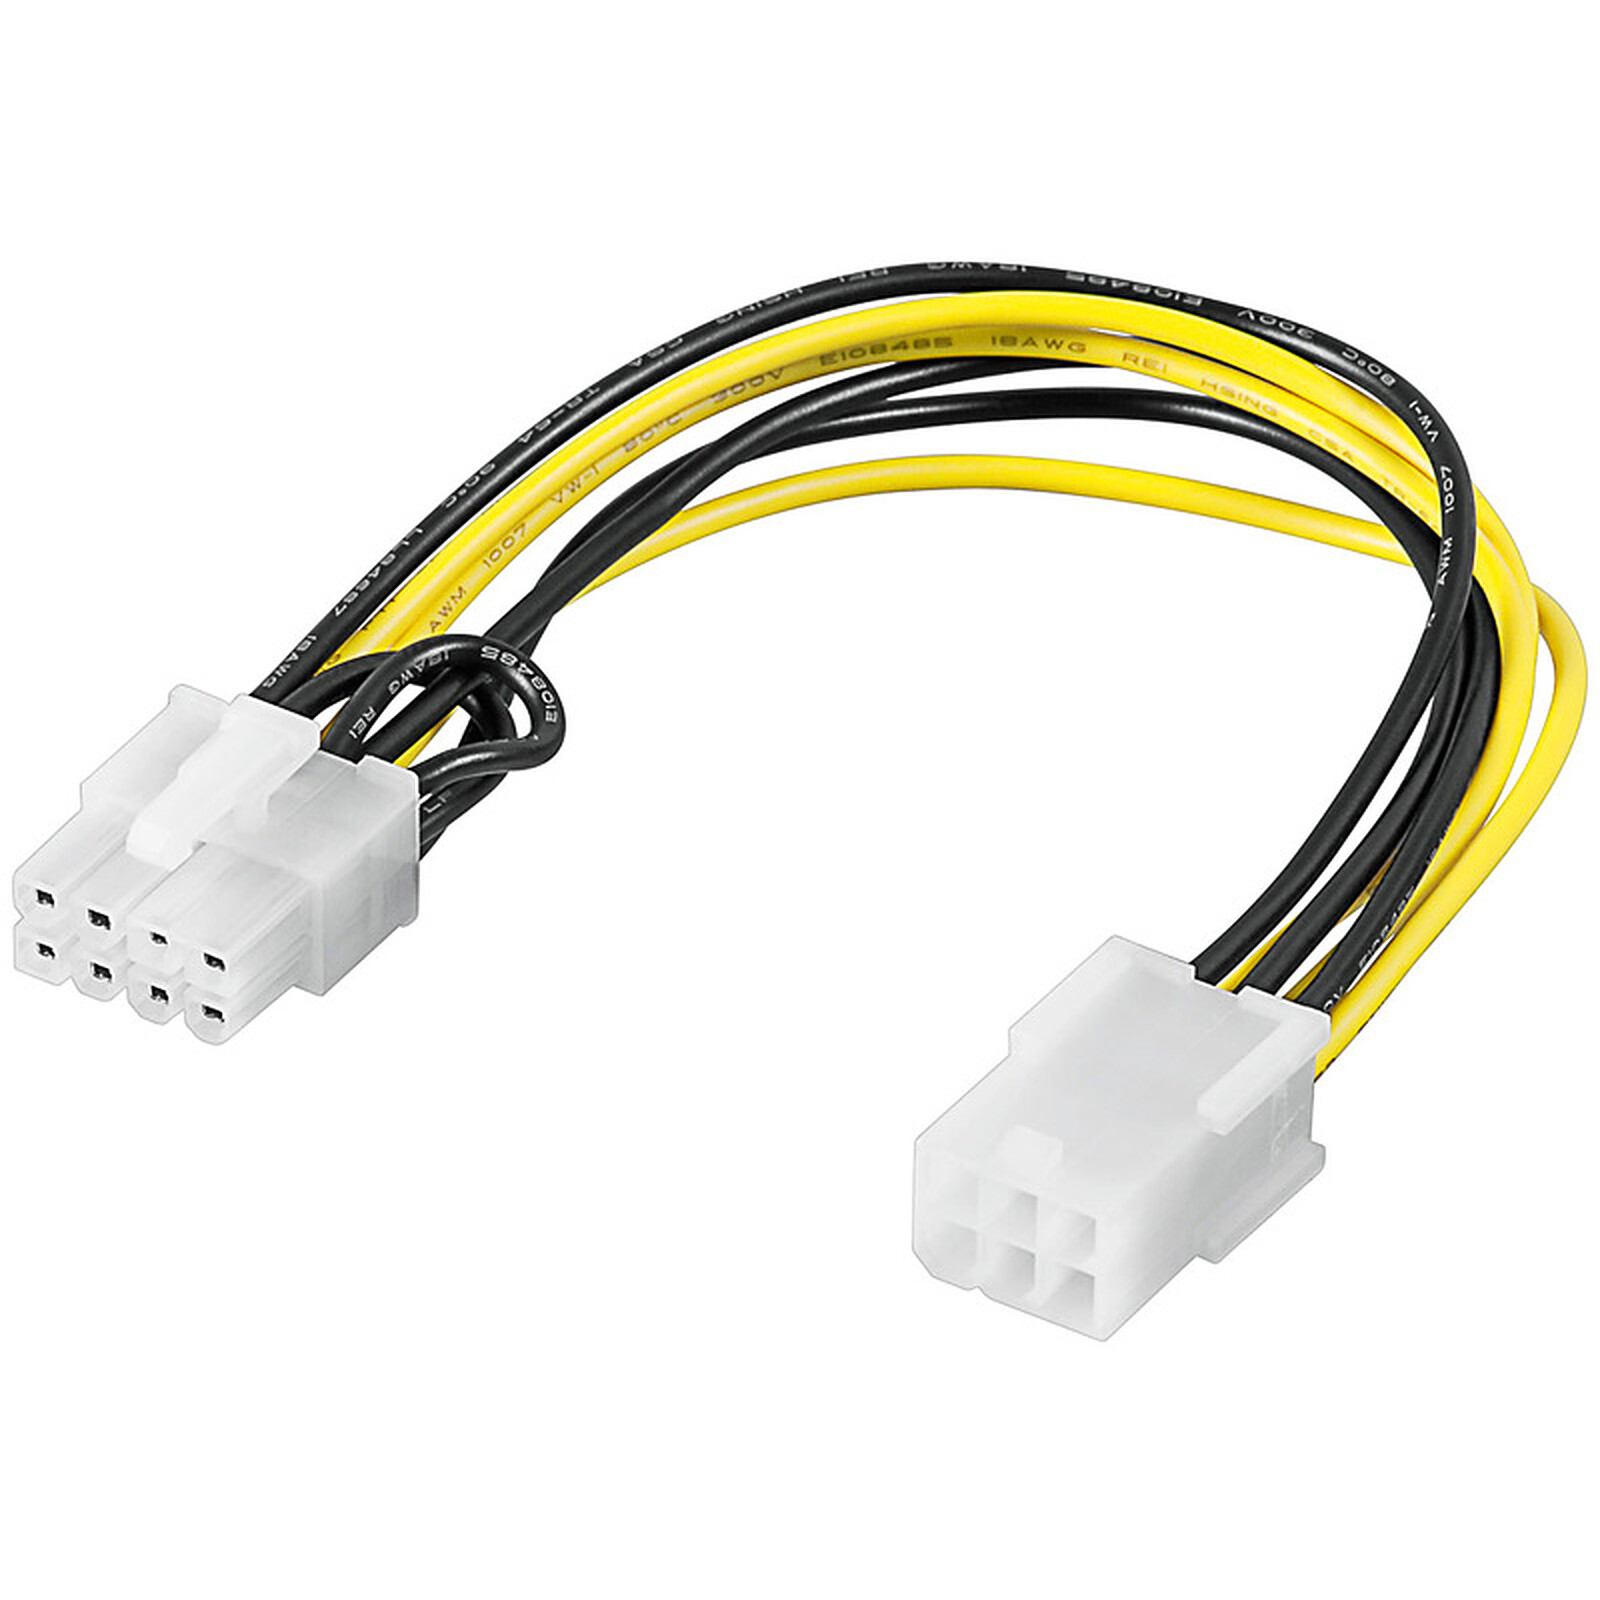 Change clothes Cherry freezer 6 Pin PCI-E to 8 Pin PCI-E Adapter - Computer power supply Generic on LDLC